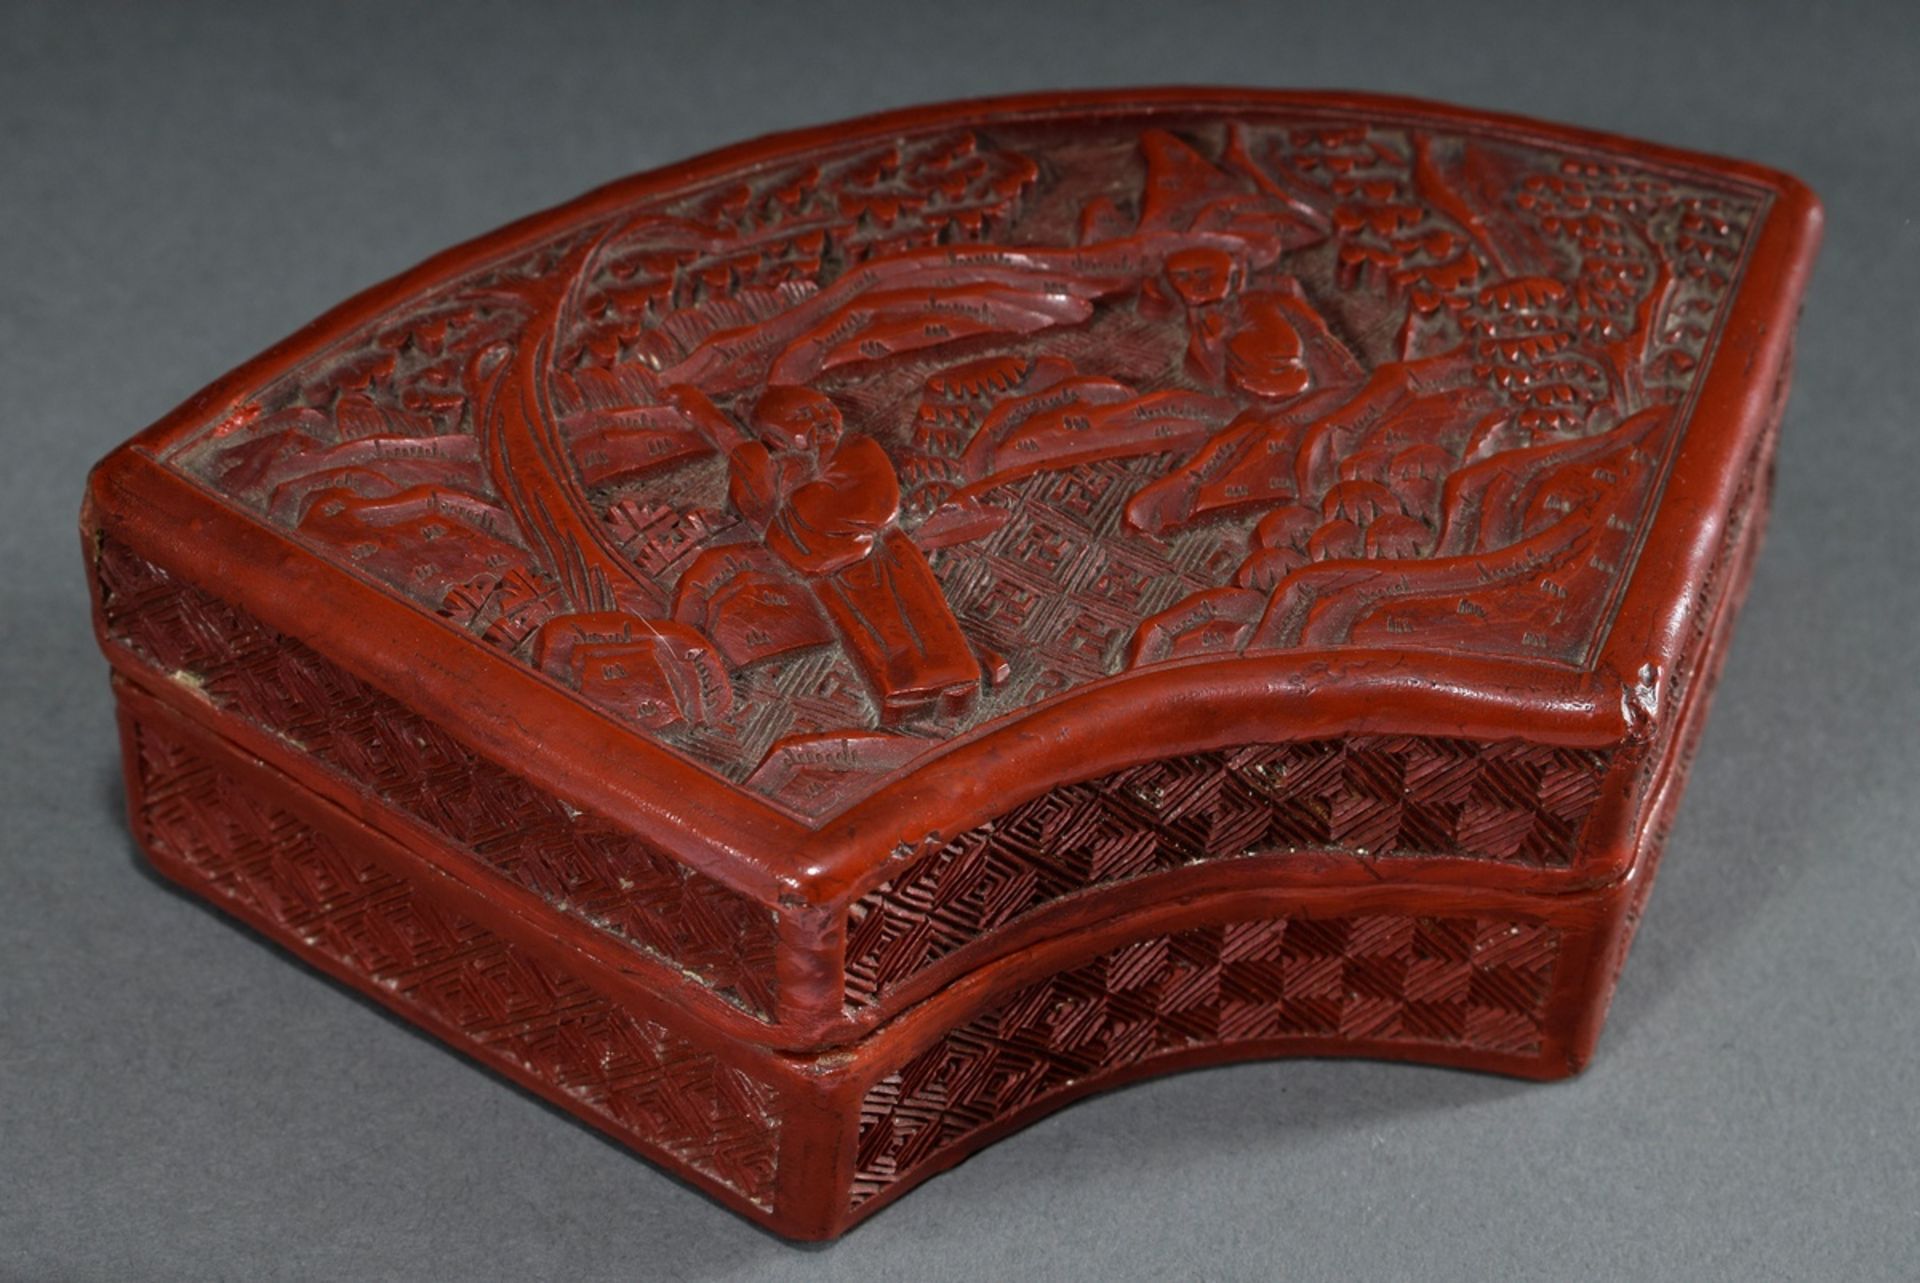 2 Various round and fan-shaped boxes "Garden Scenes" in carved lacquer Art, China c. 1900, h. 7cm,  - Image 7 of 9